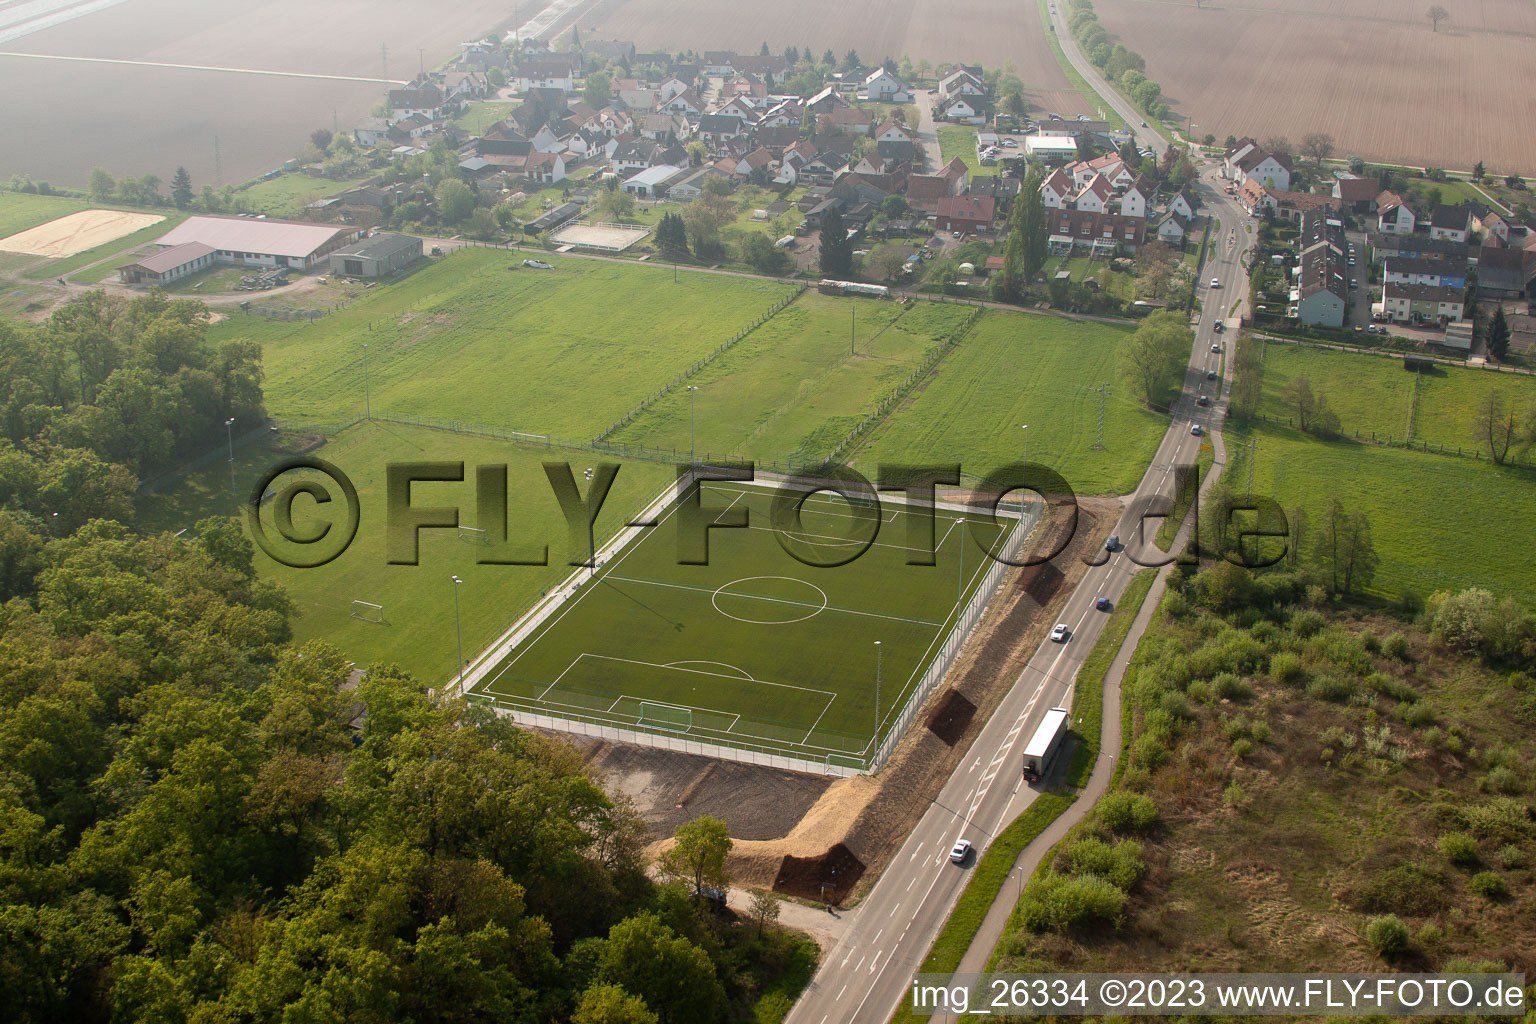 Aerial view of New artificial turf pitch in the district Minderslachen in Kandel in the state Rhineland-Palatinate, Germany